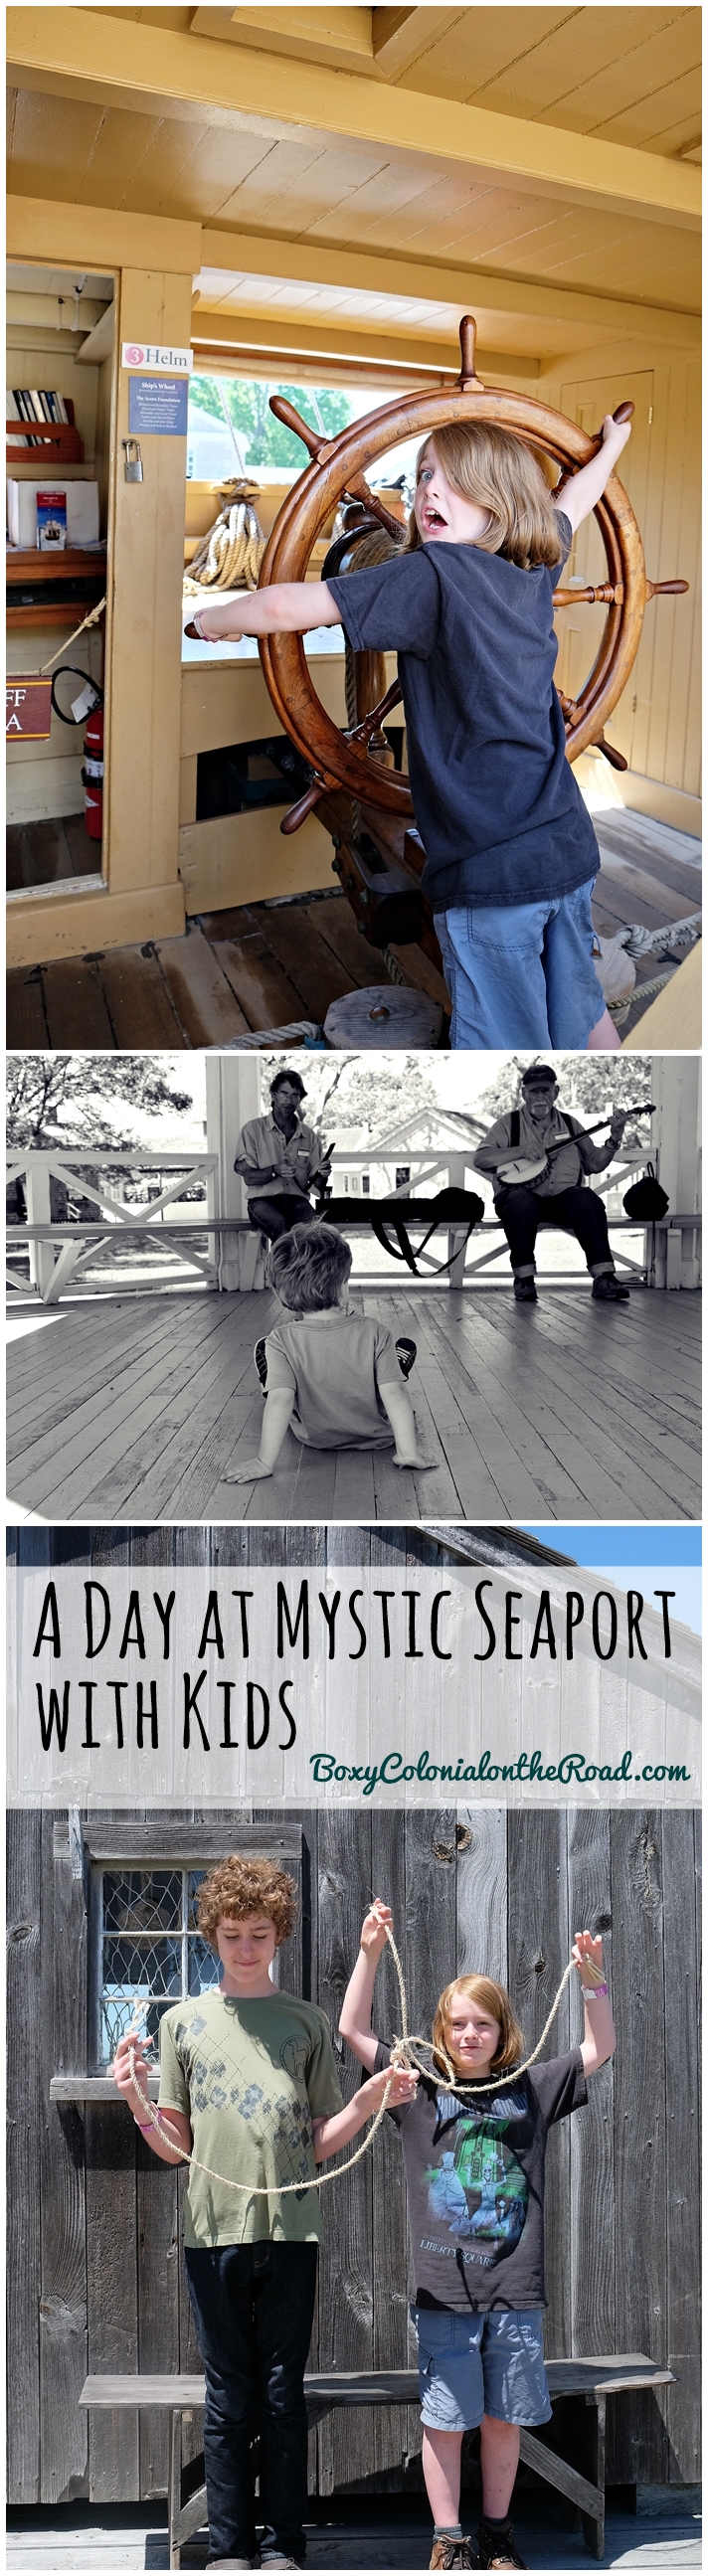 A day touring Mystic Seaport in Mystic, CT with kids